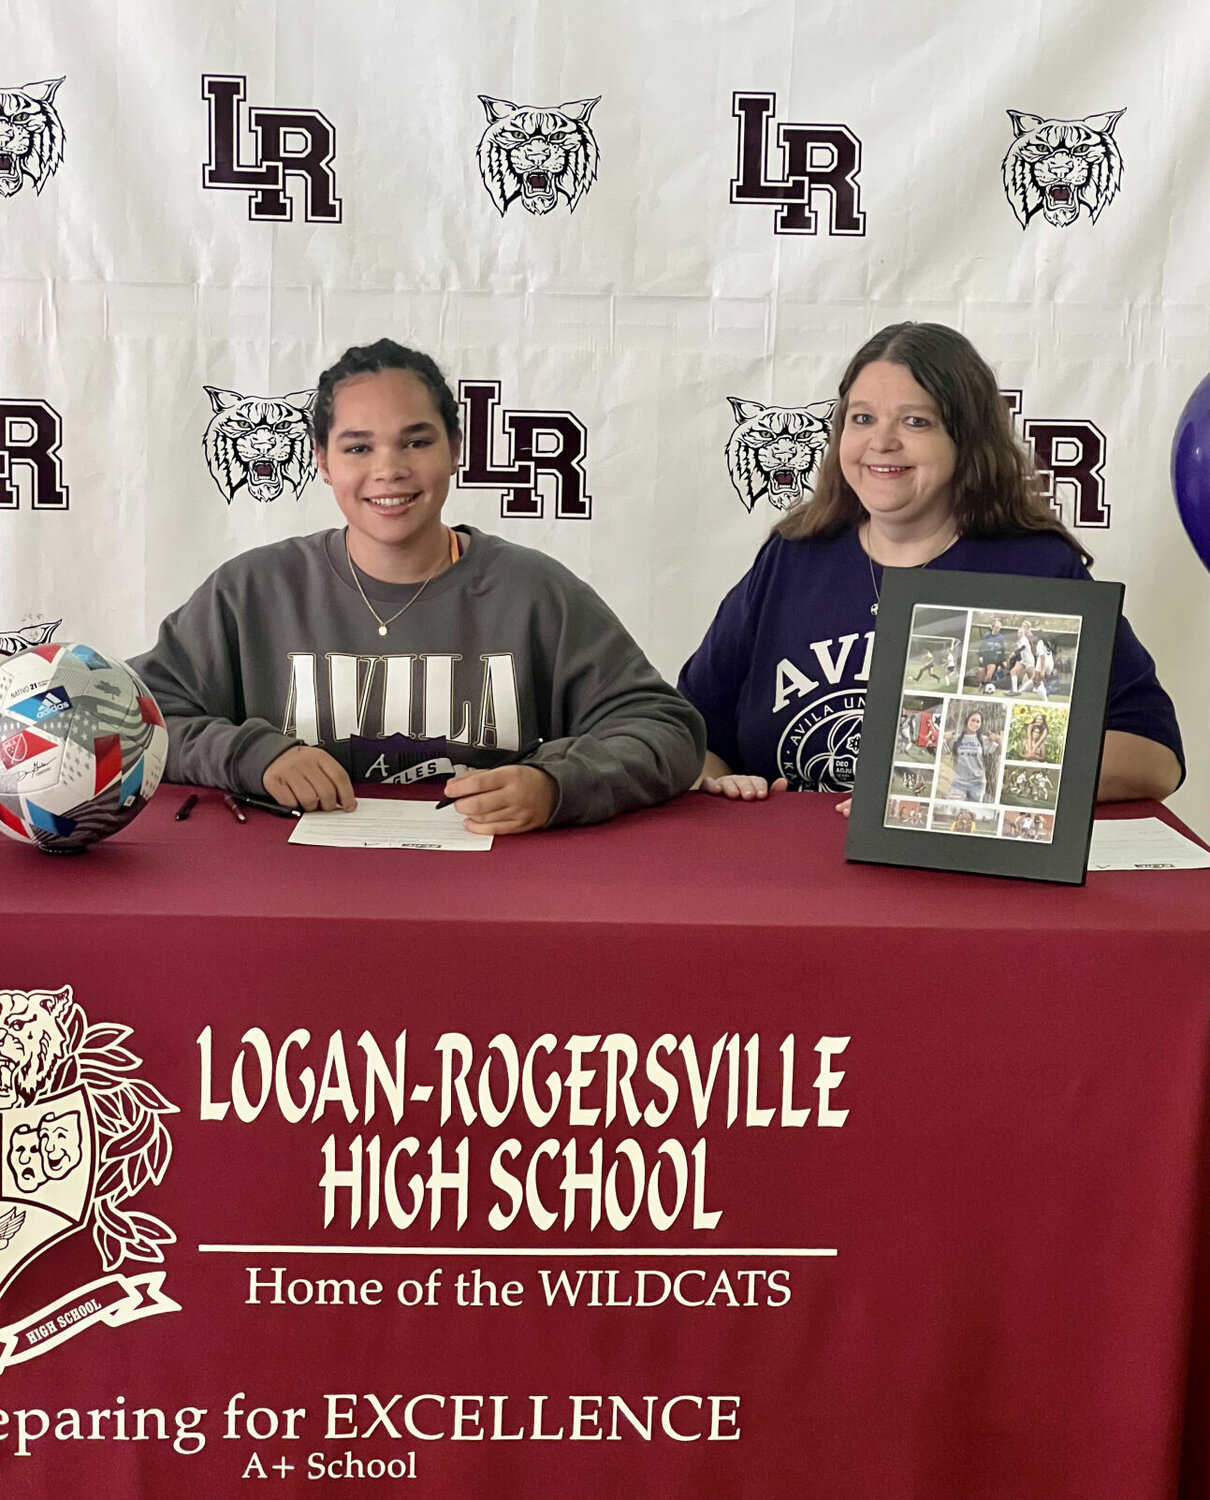 After signing her letter play soccer at Avila University Nikki Wood smiles with pride.